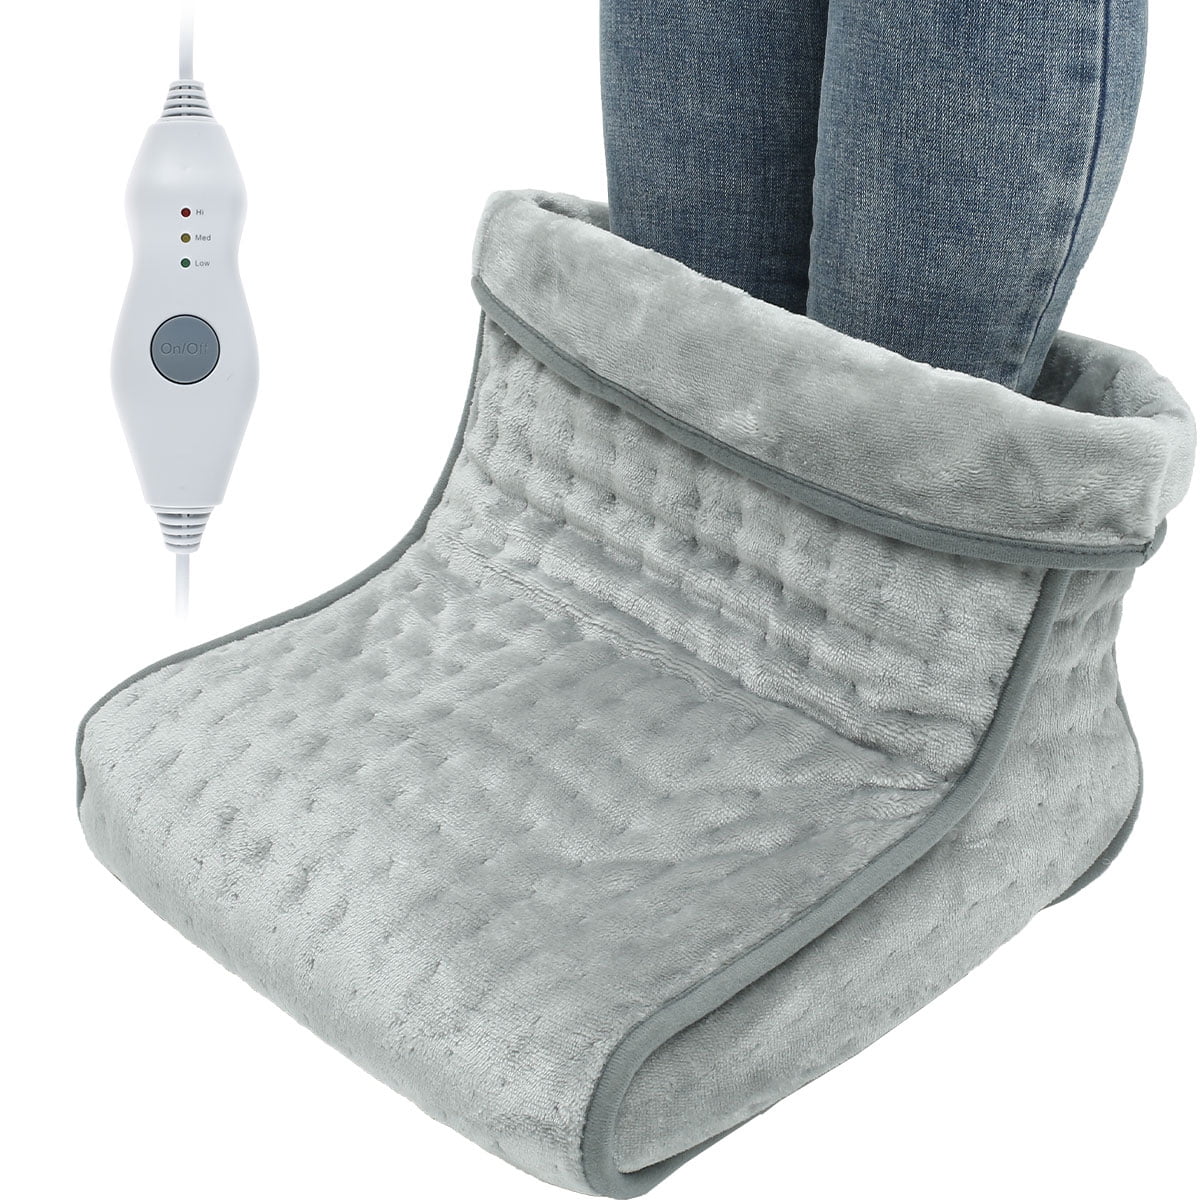 Electric Heated Foot Warmers for Men and Women Foot Heating Pad Electric New 